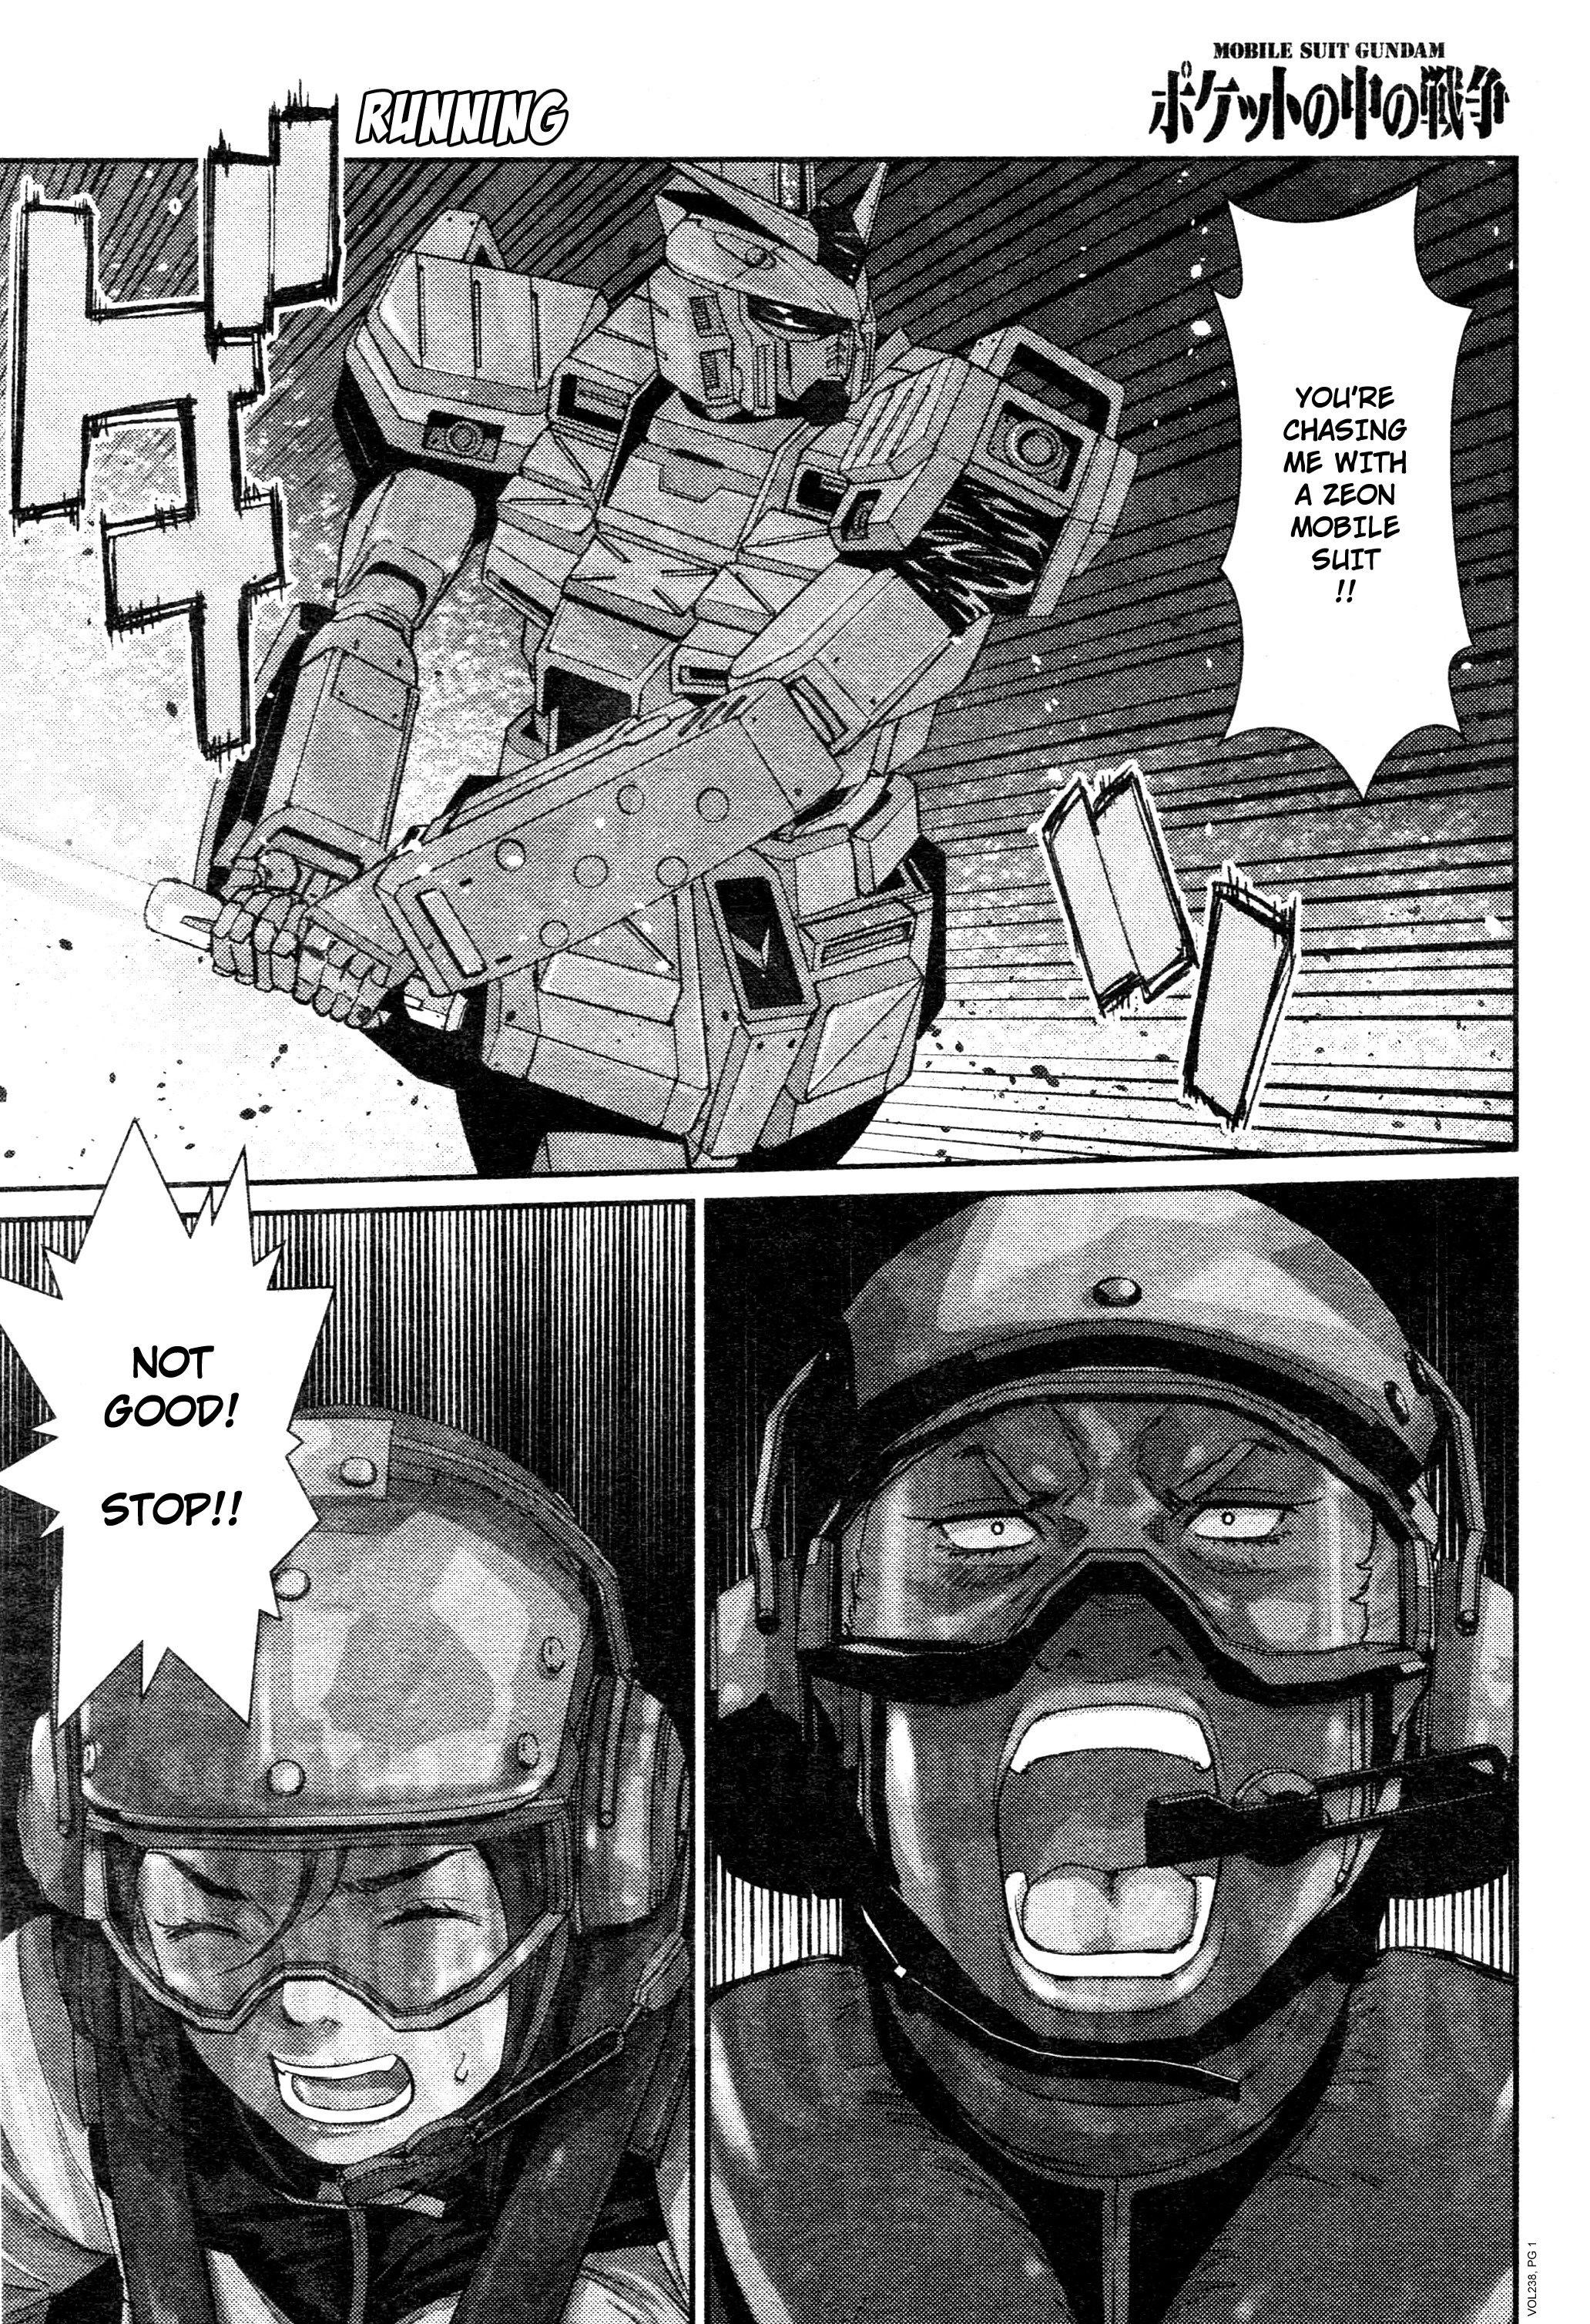 Mobile Suit Gundam 0080 - War In The Pocket Chapter 8 #1